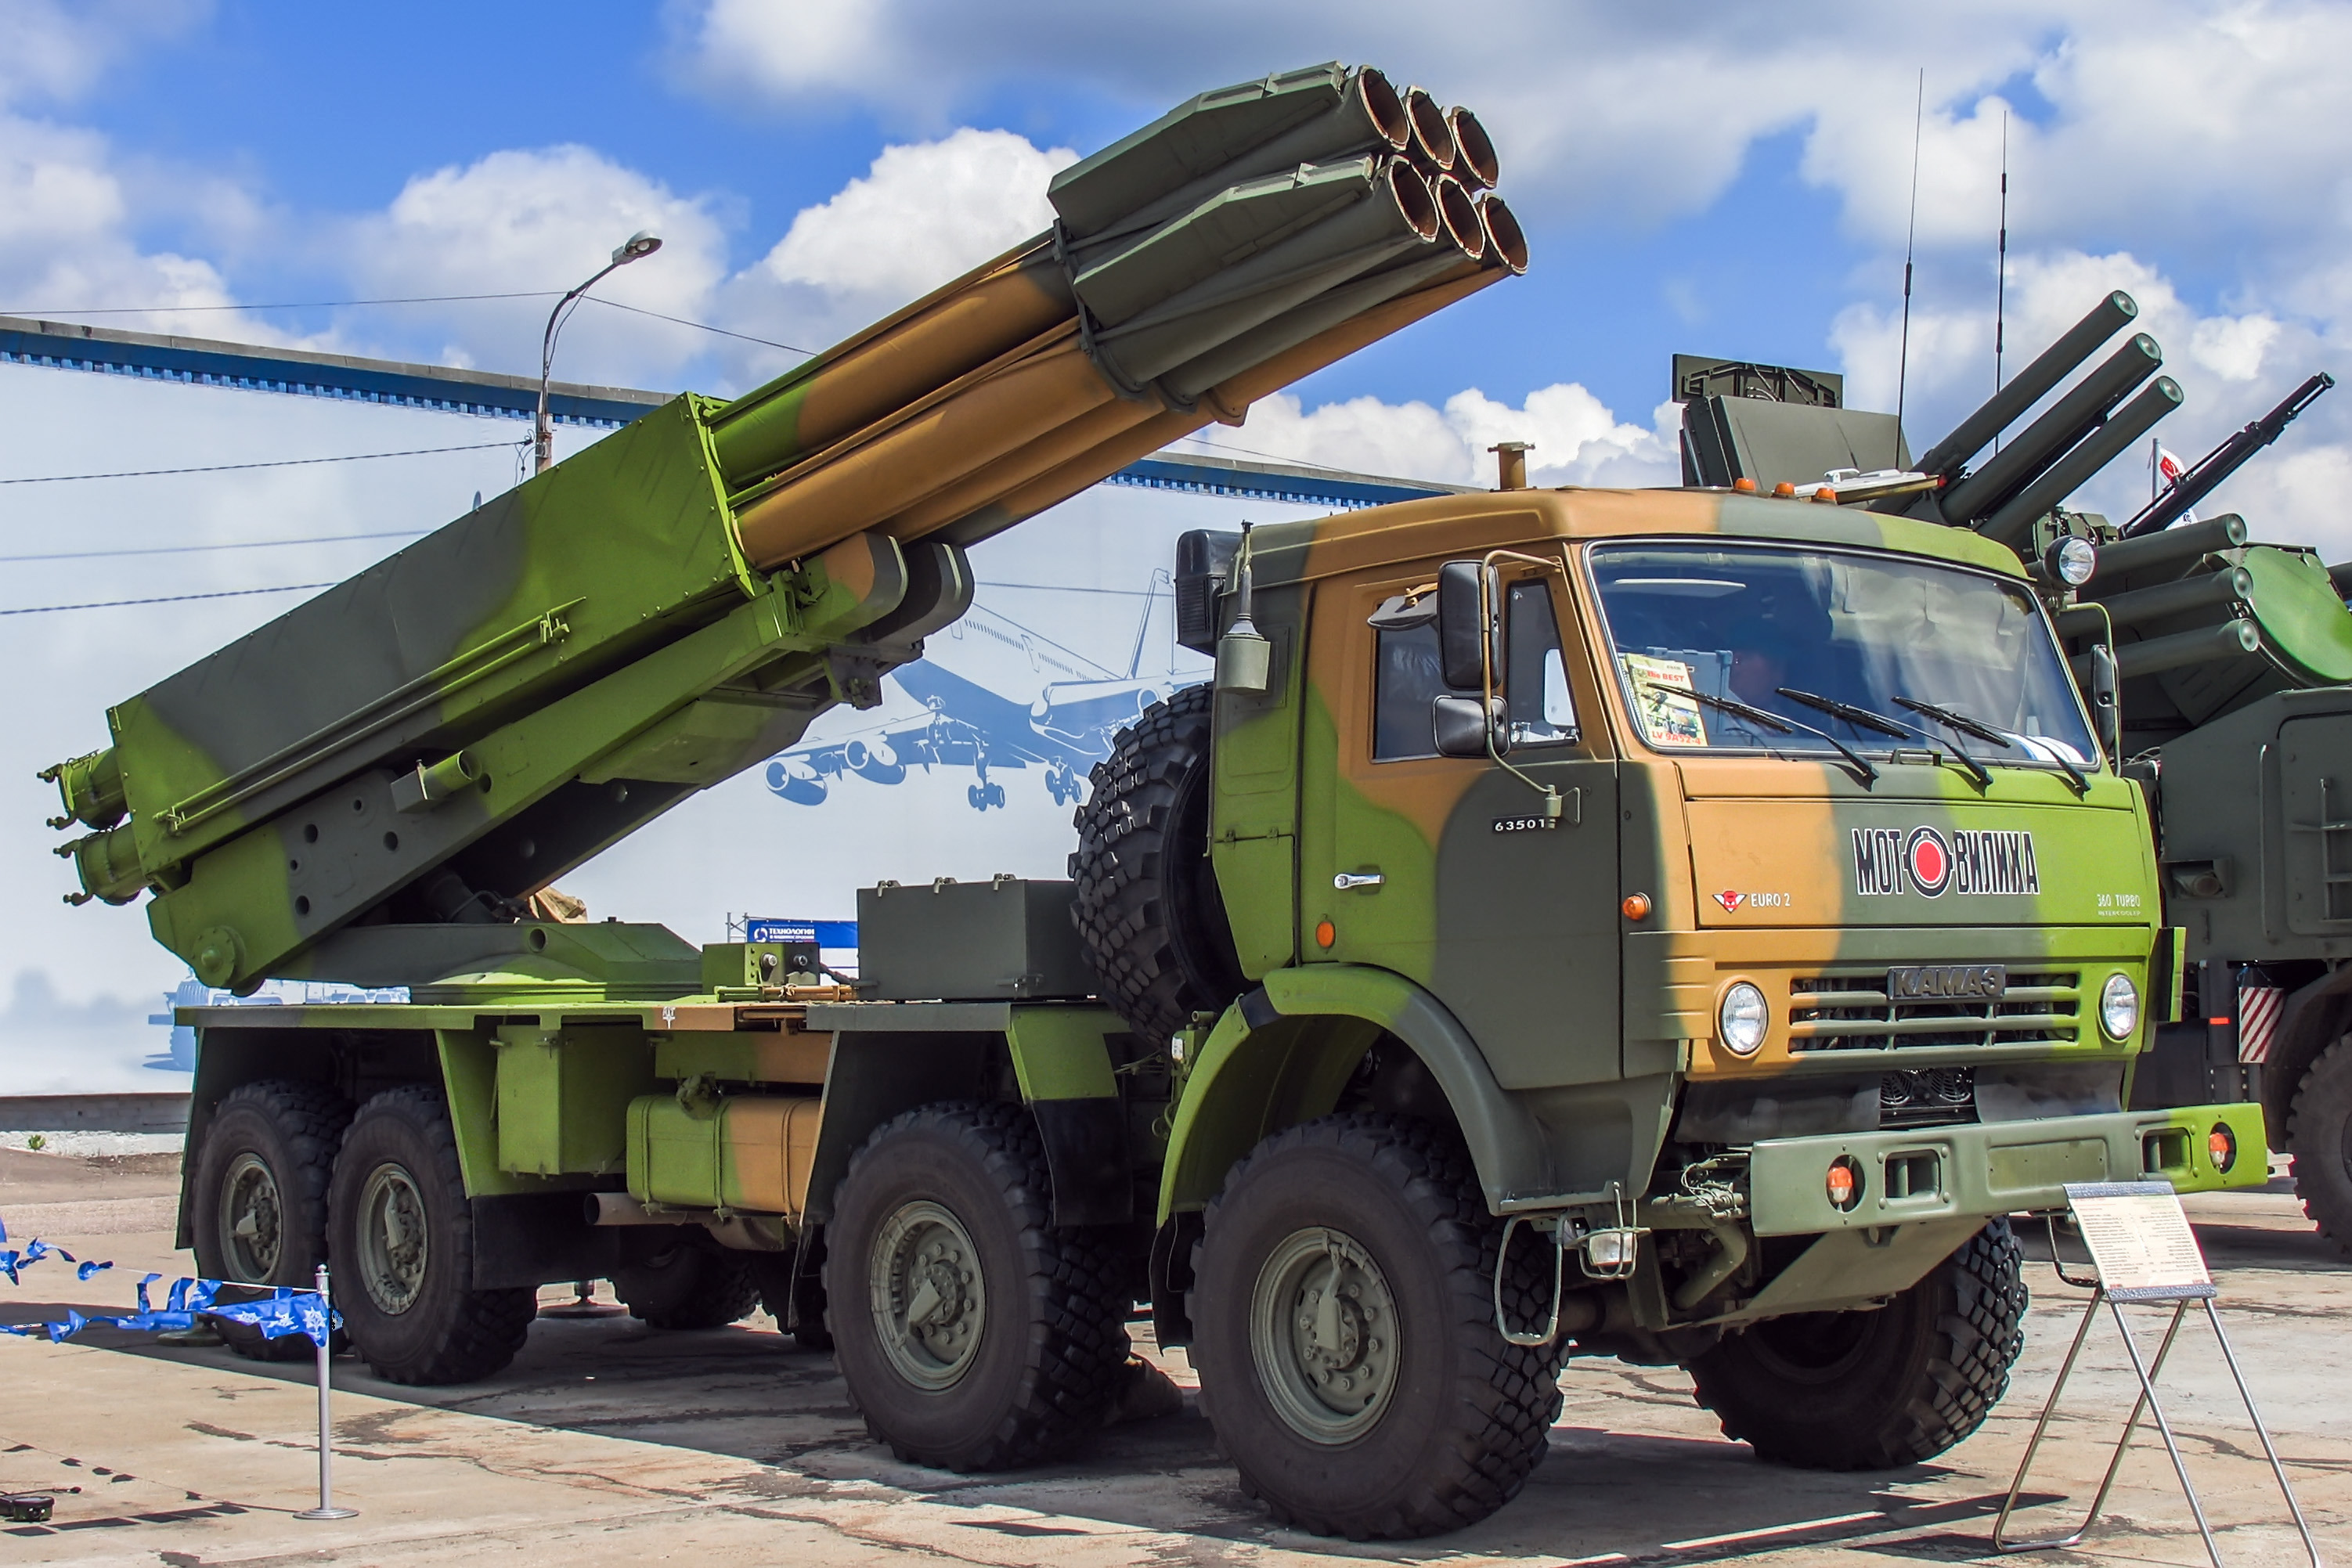 Russia Is Developing New Highly Mobile Multiple Rocket Launch System - Report